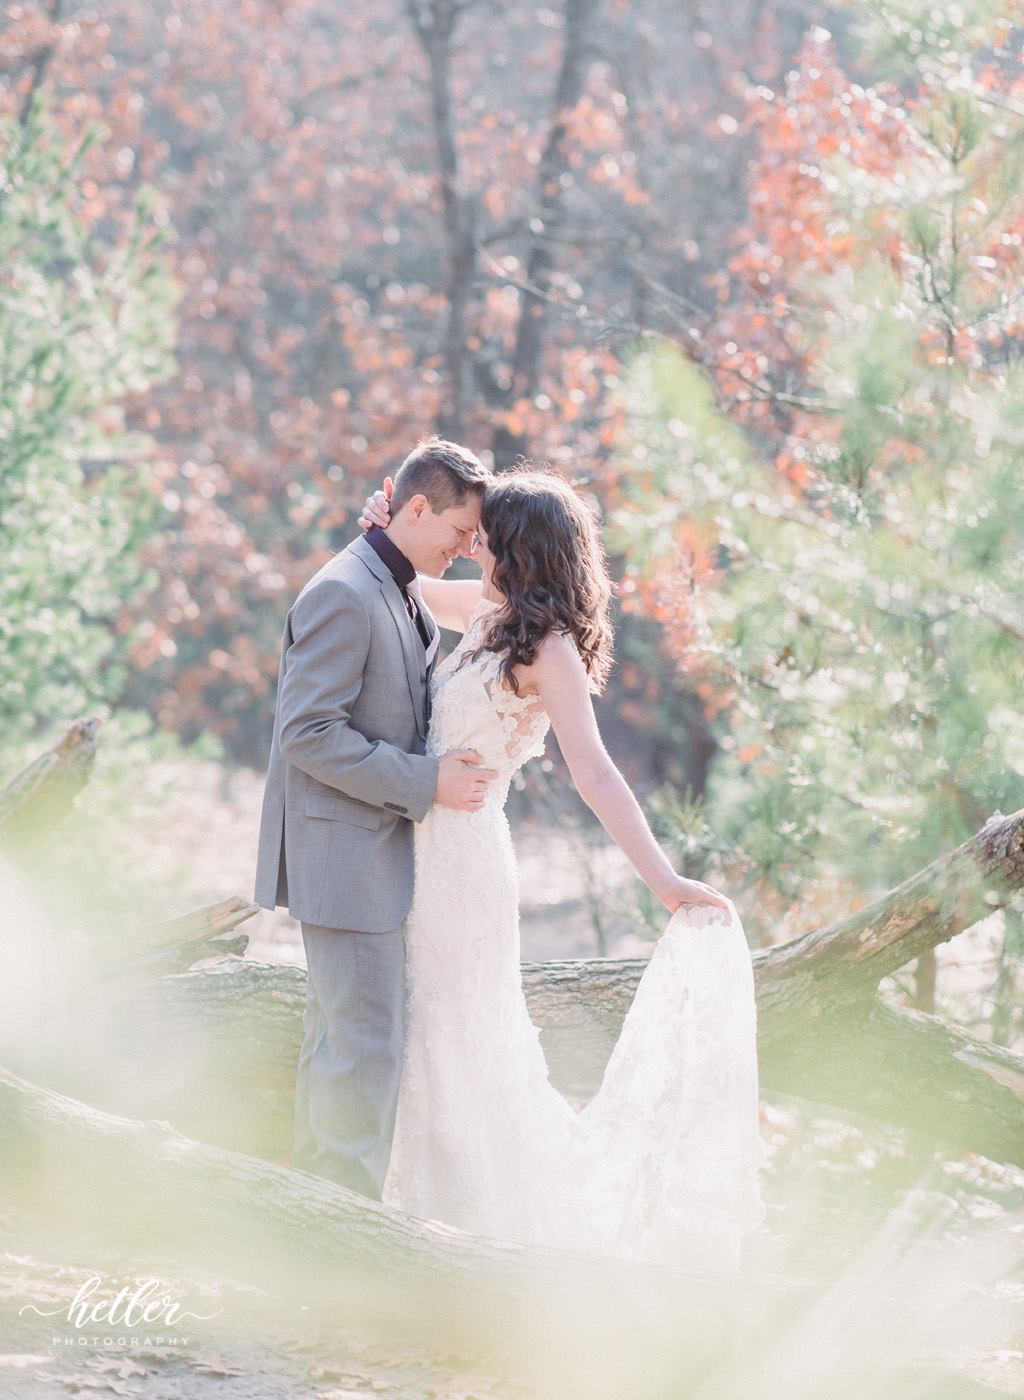 Provin Trails fine art wedding photography in winter with no snow and lots of sunshine!